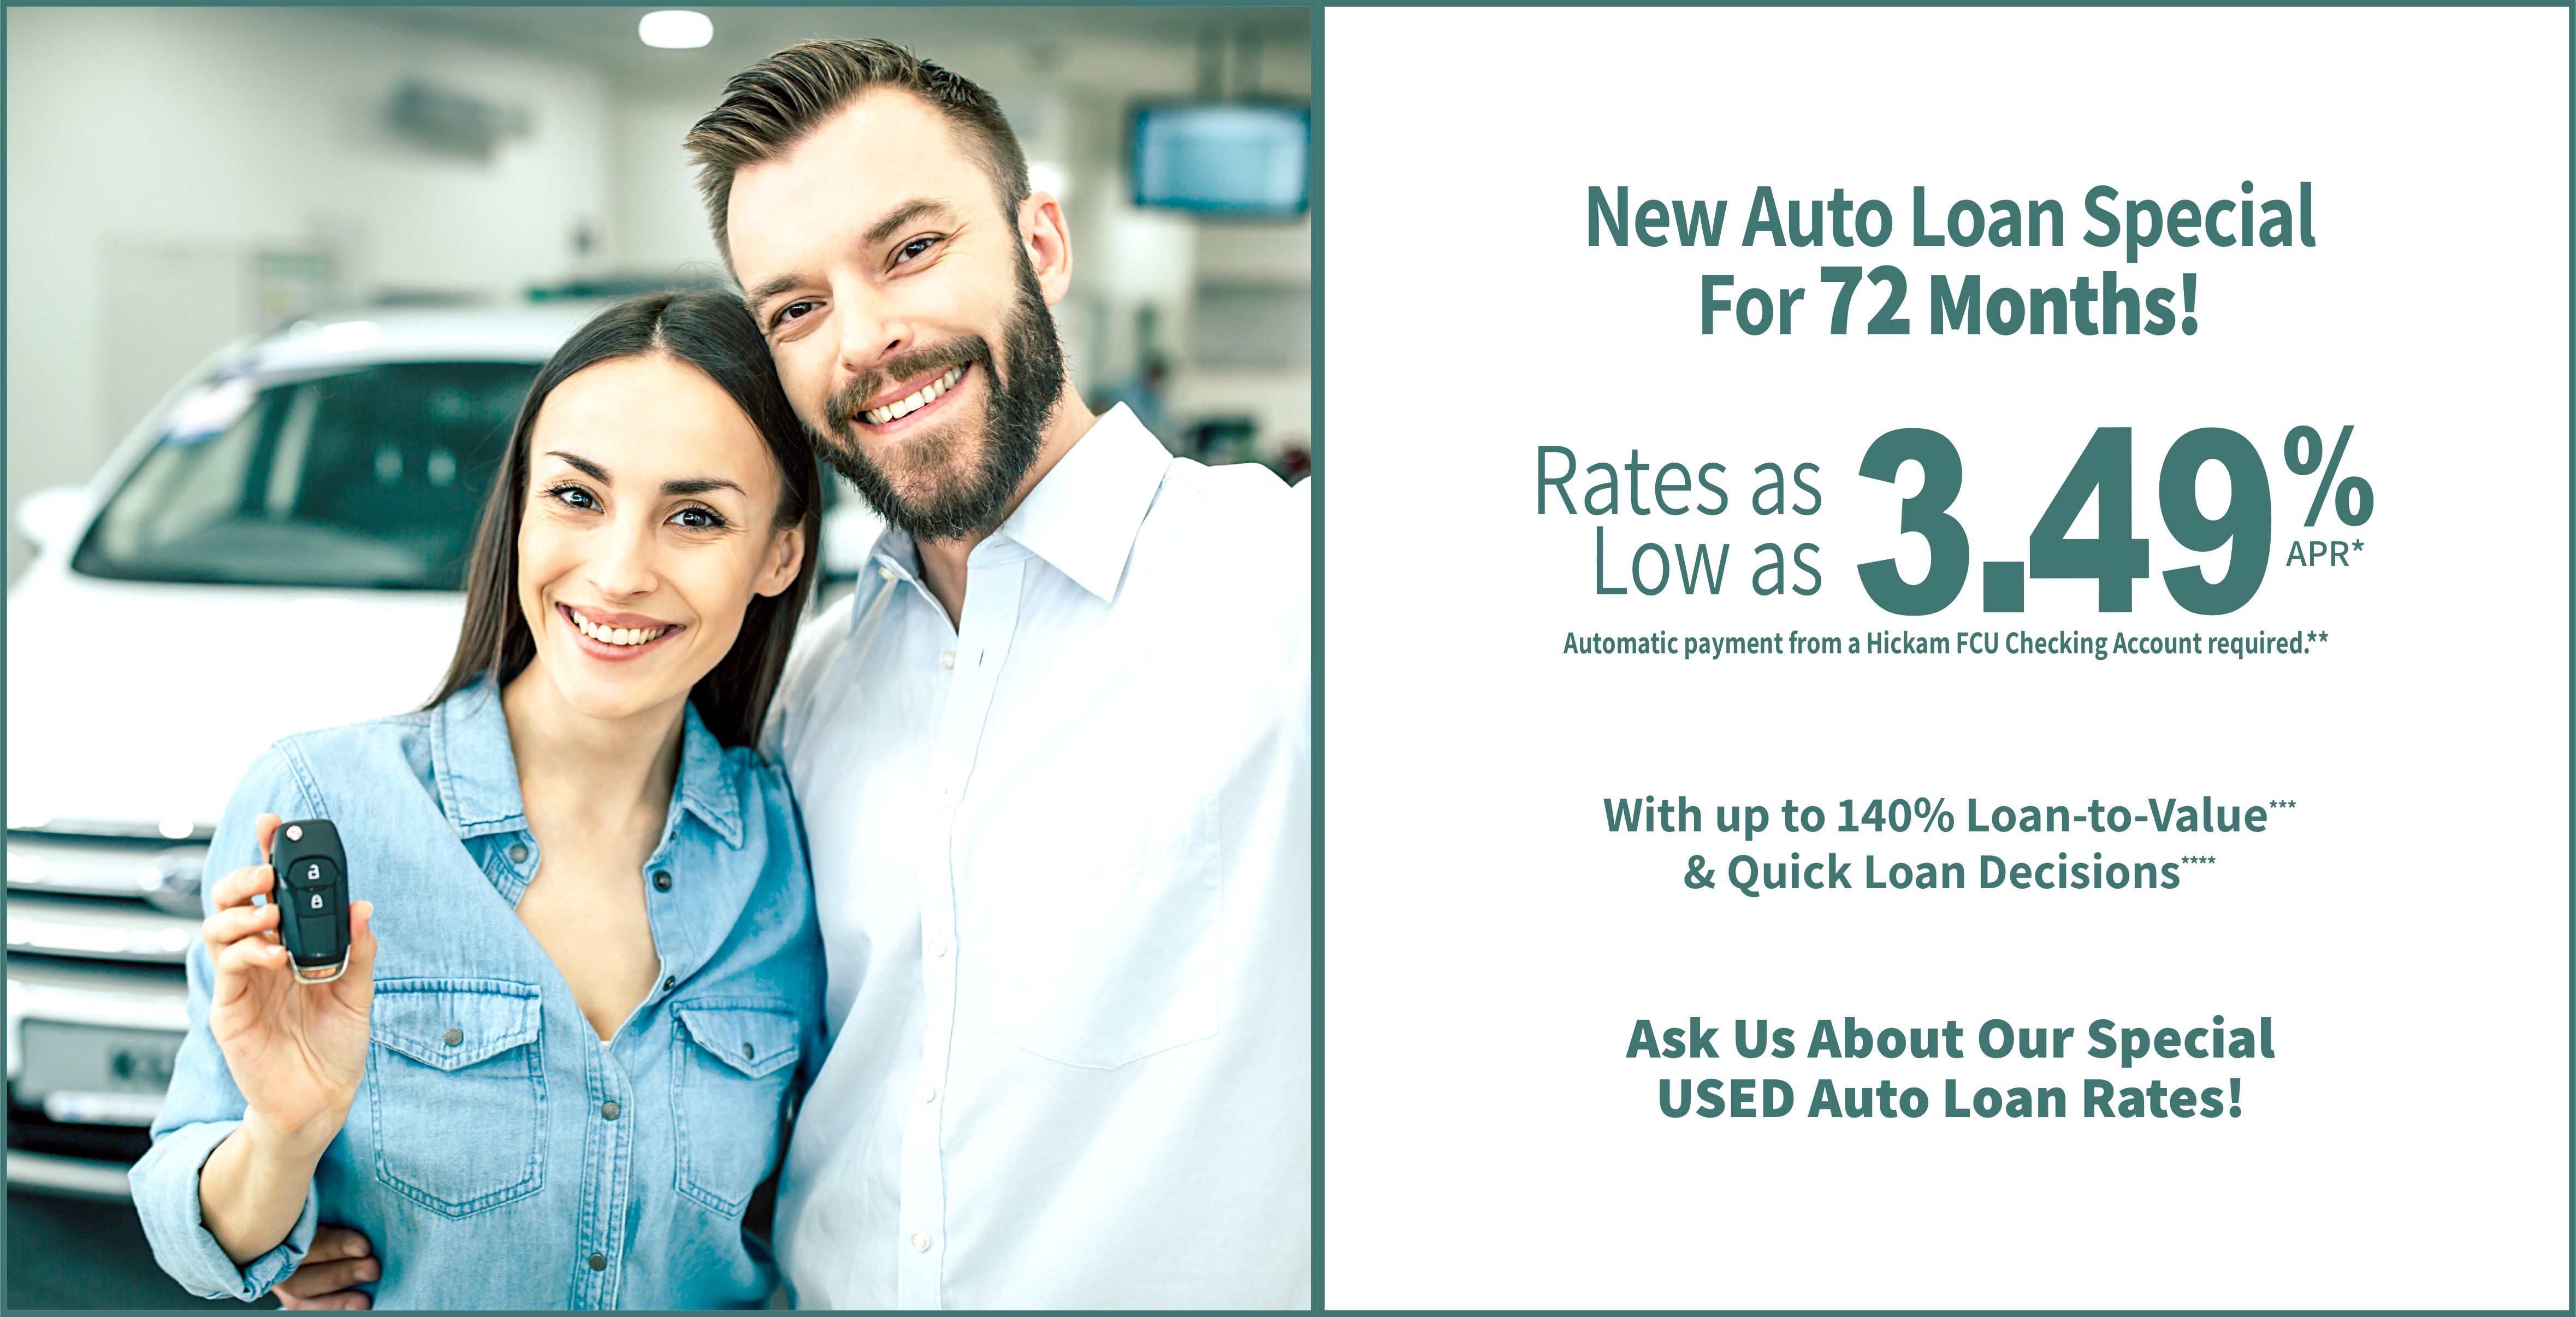 New Auto Loan Special for 72 months!. Rates as low as 3.49% with up to 140% loan-to-value. Ask us about our special new auto loan rates! great low rates quick loan decisions. Easy online applications